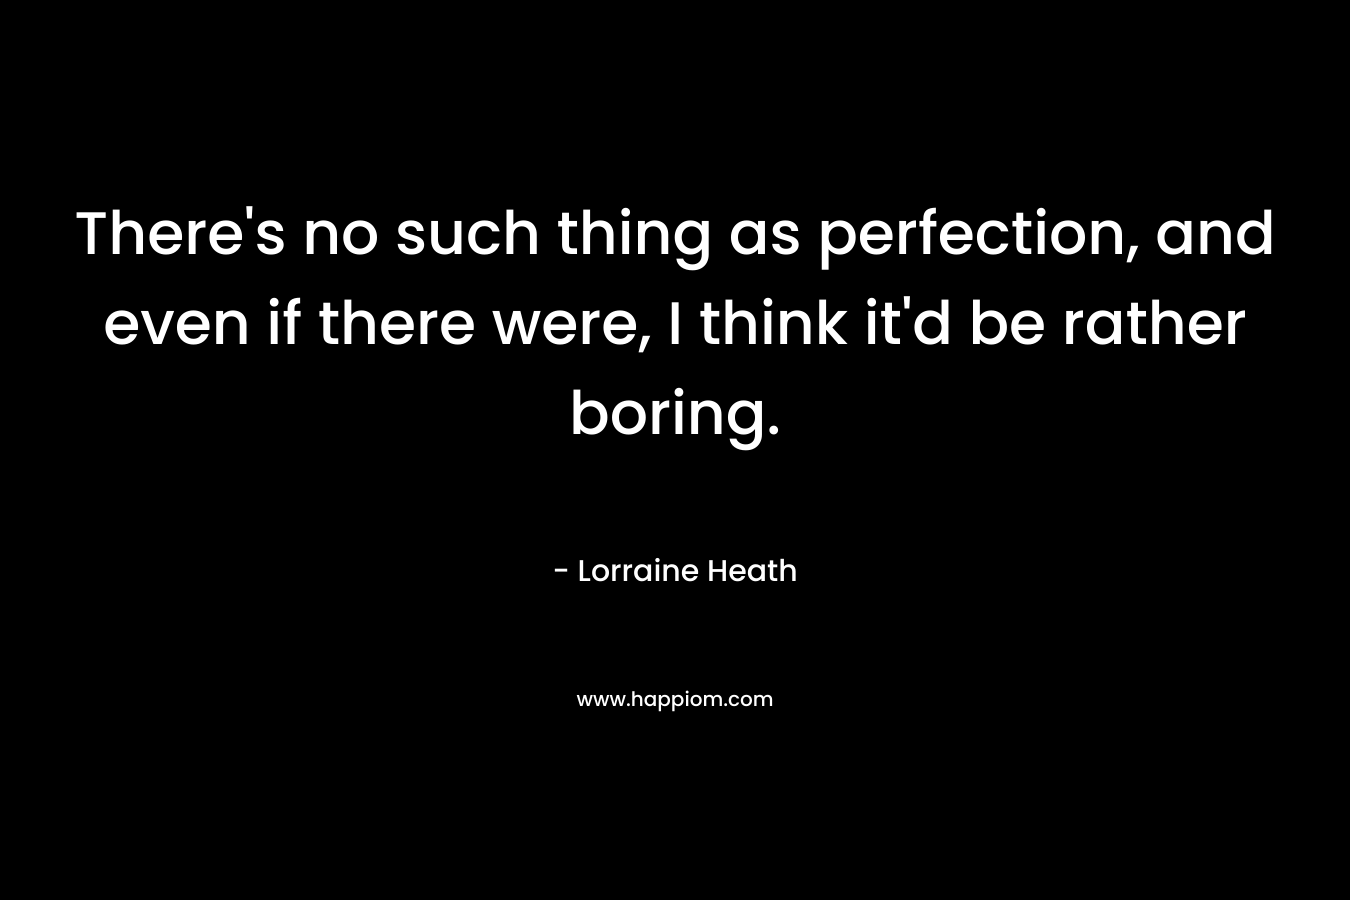 There’s no such thing as perfection, and even if there were, I think it’d be rather boring. – Lorraine Heath